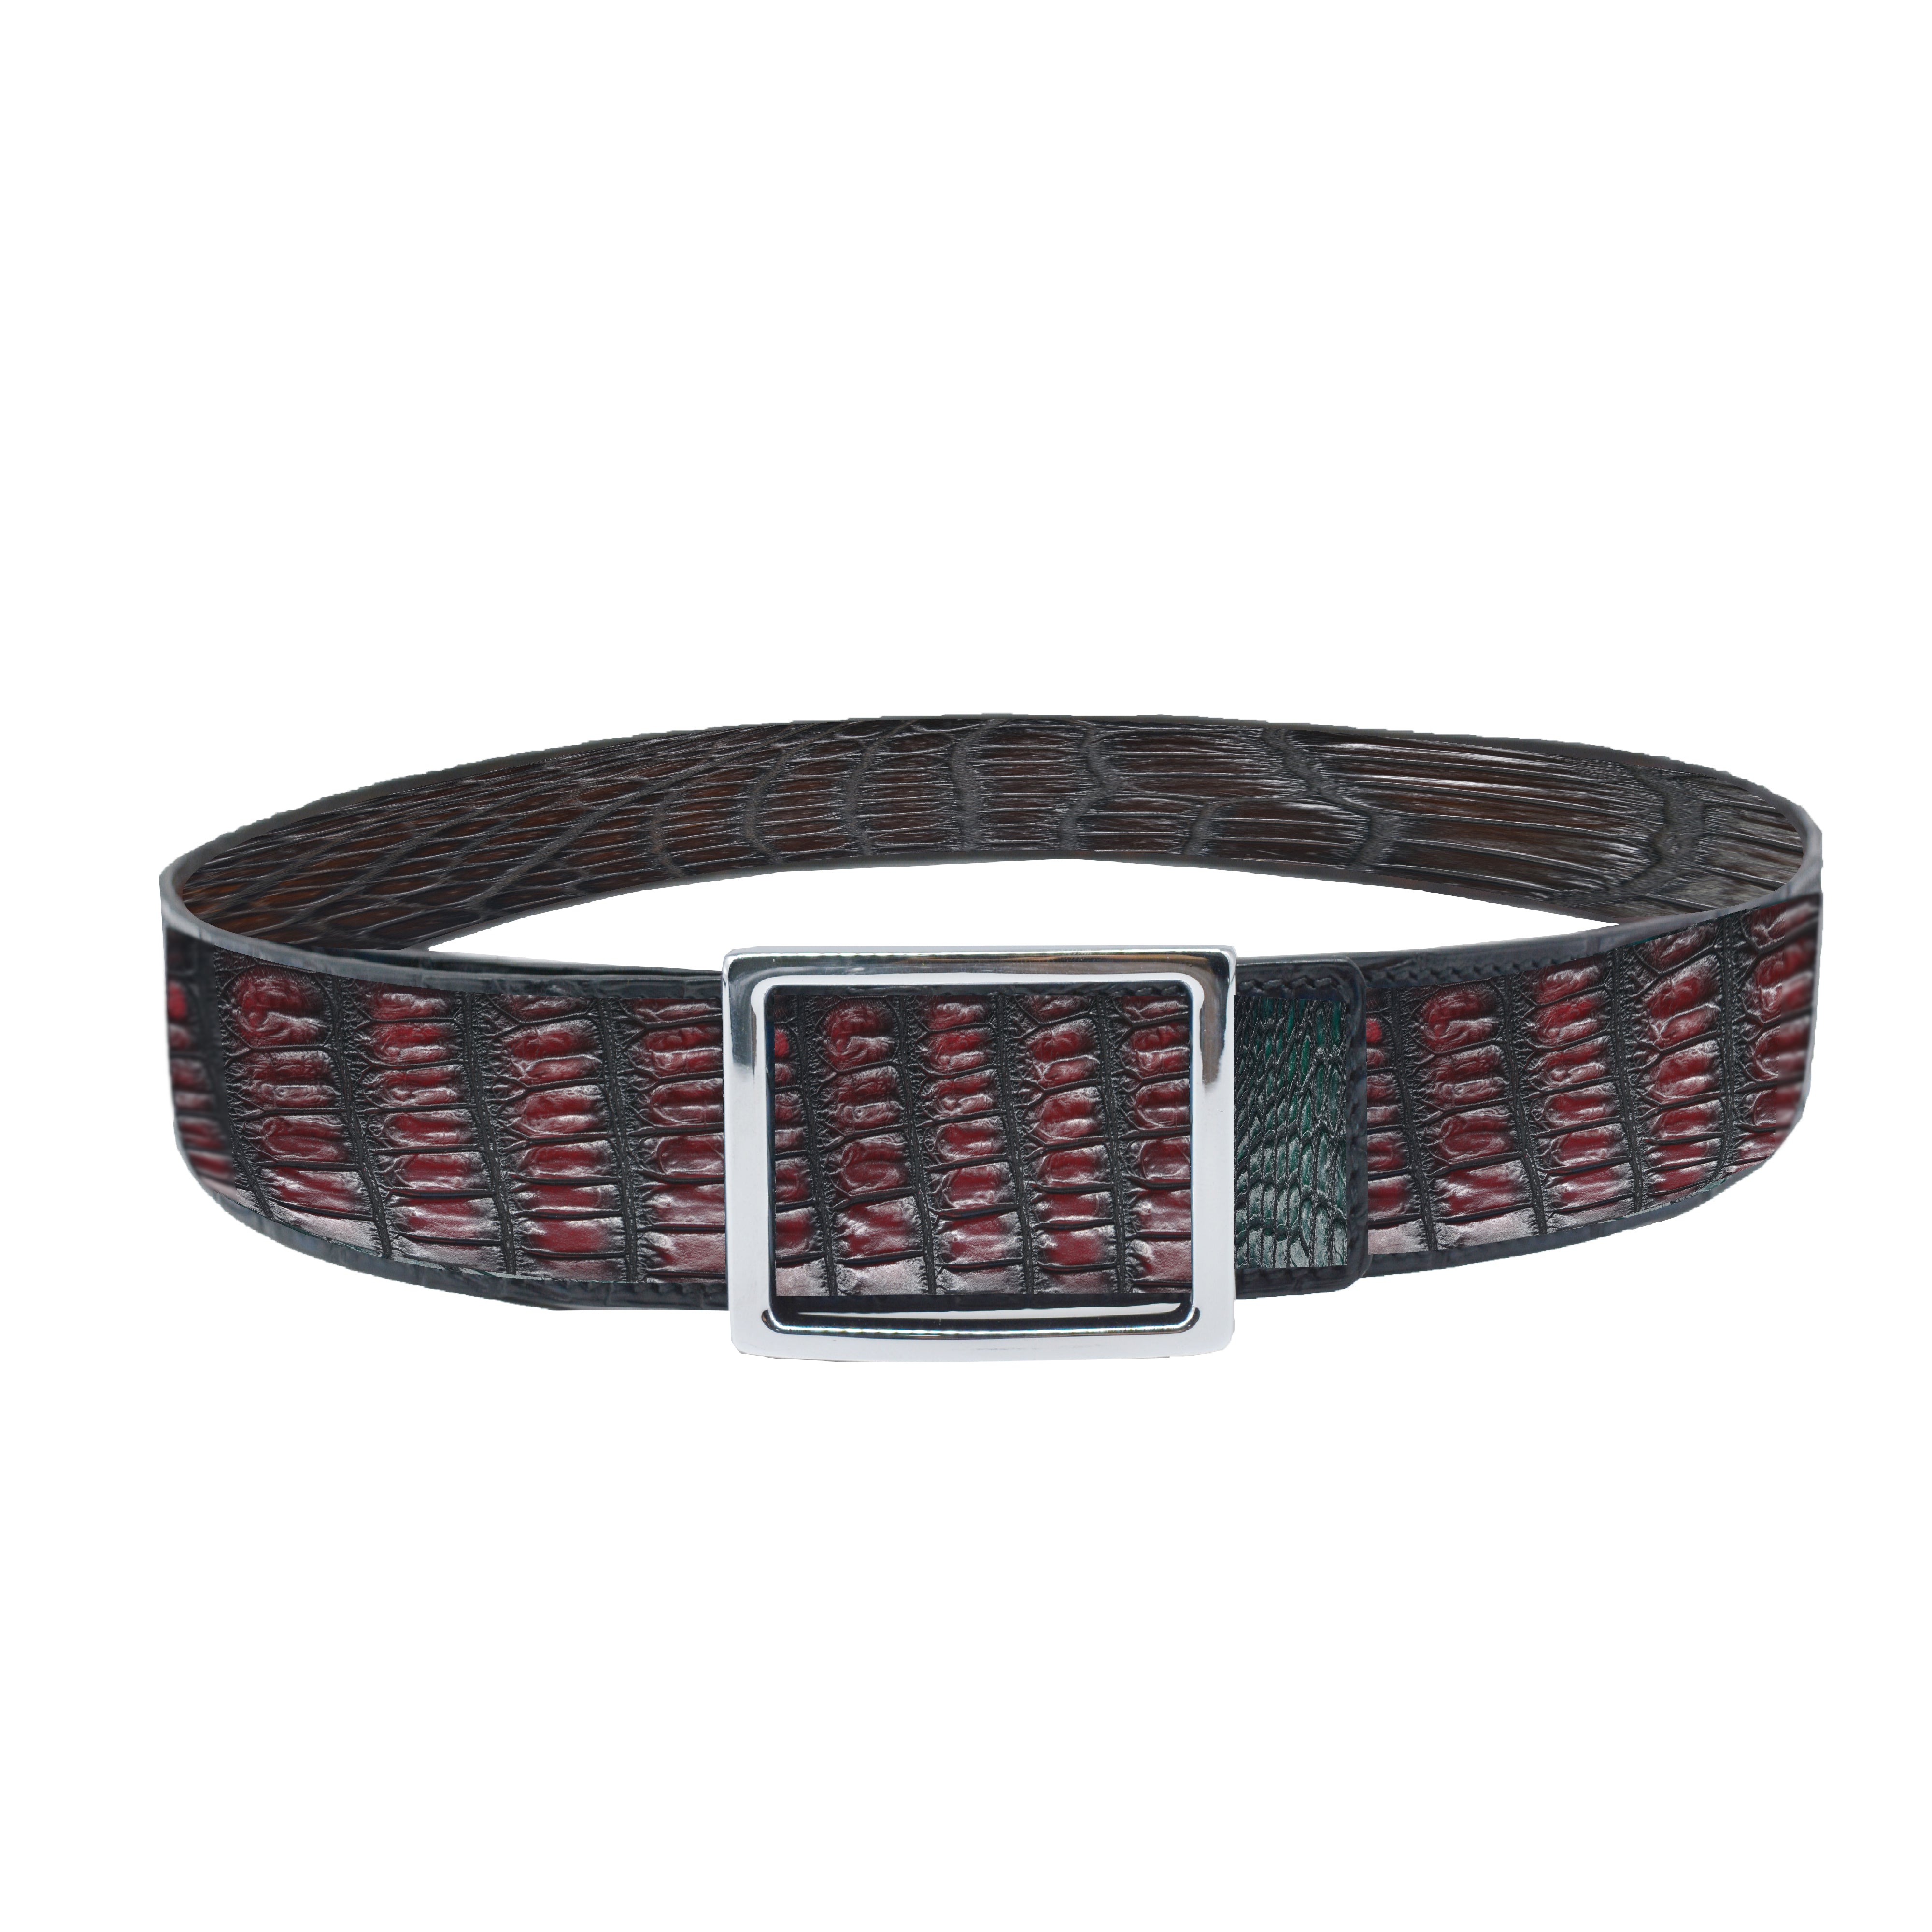 Reversible double alligator leather Dark red and black-brown belt